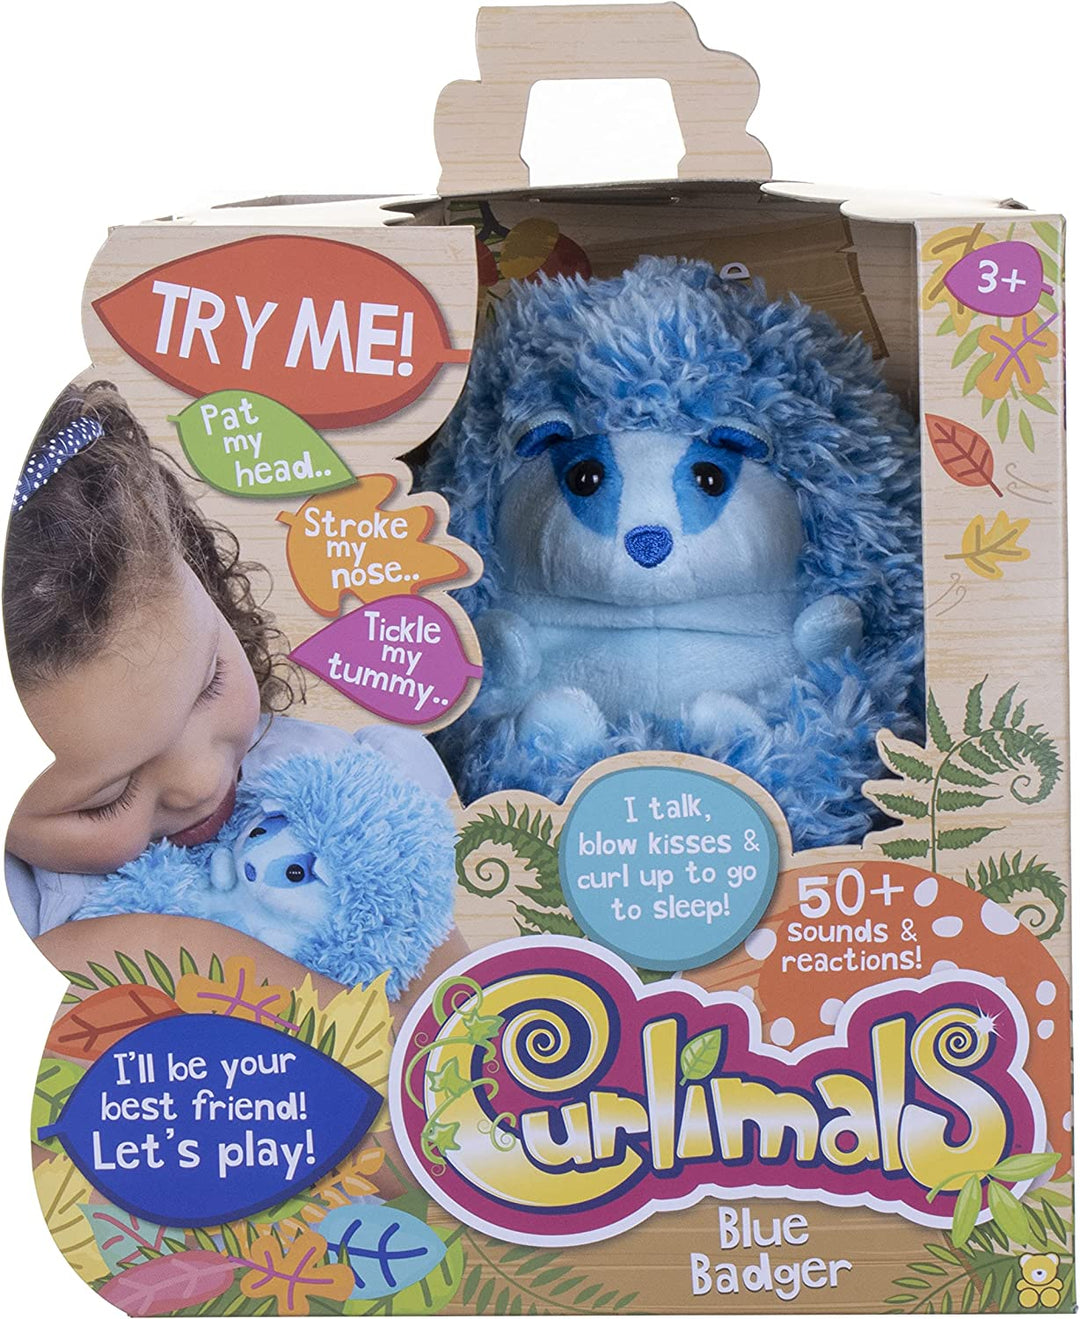 Curlimals Blue The Badger Interactive Soft Toy